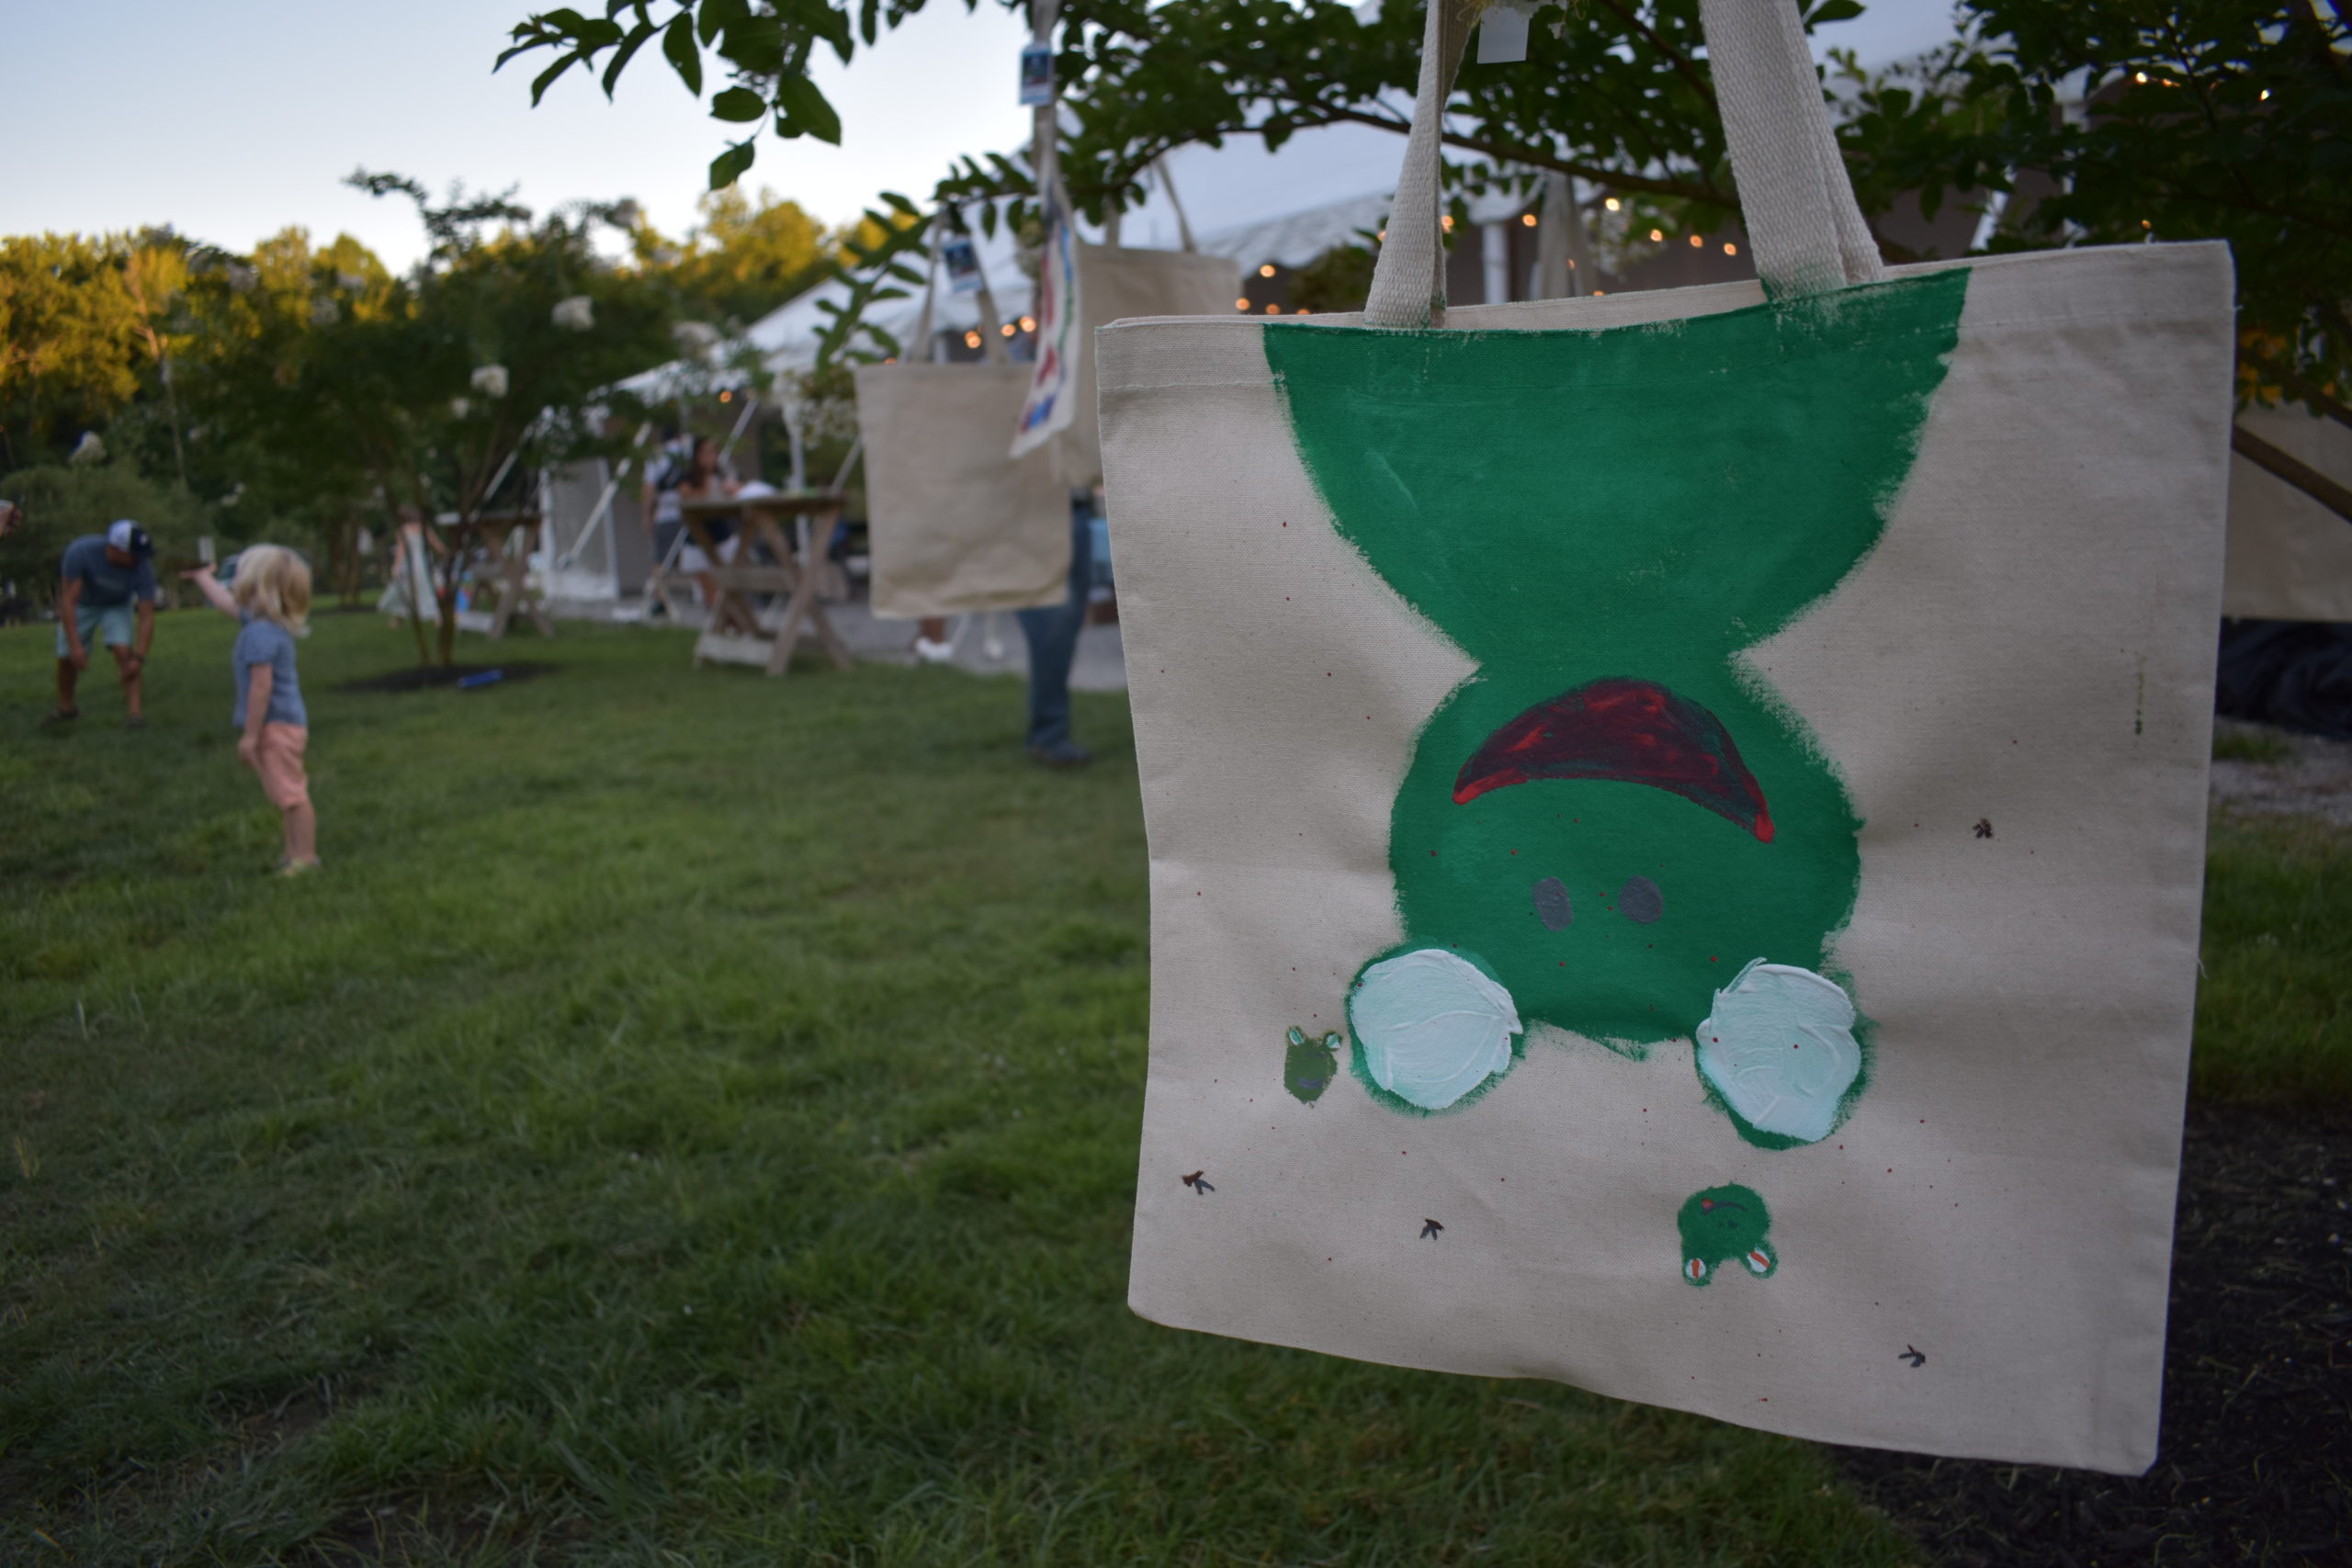 A close up of a totebag with a green front painted on it